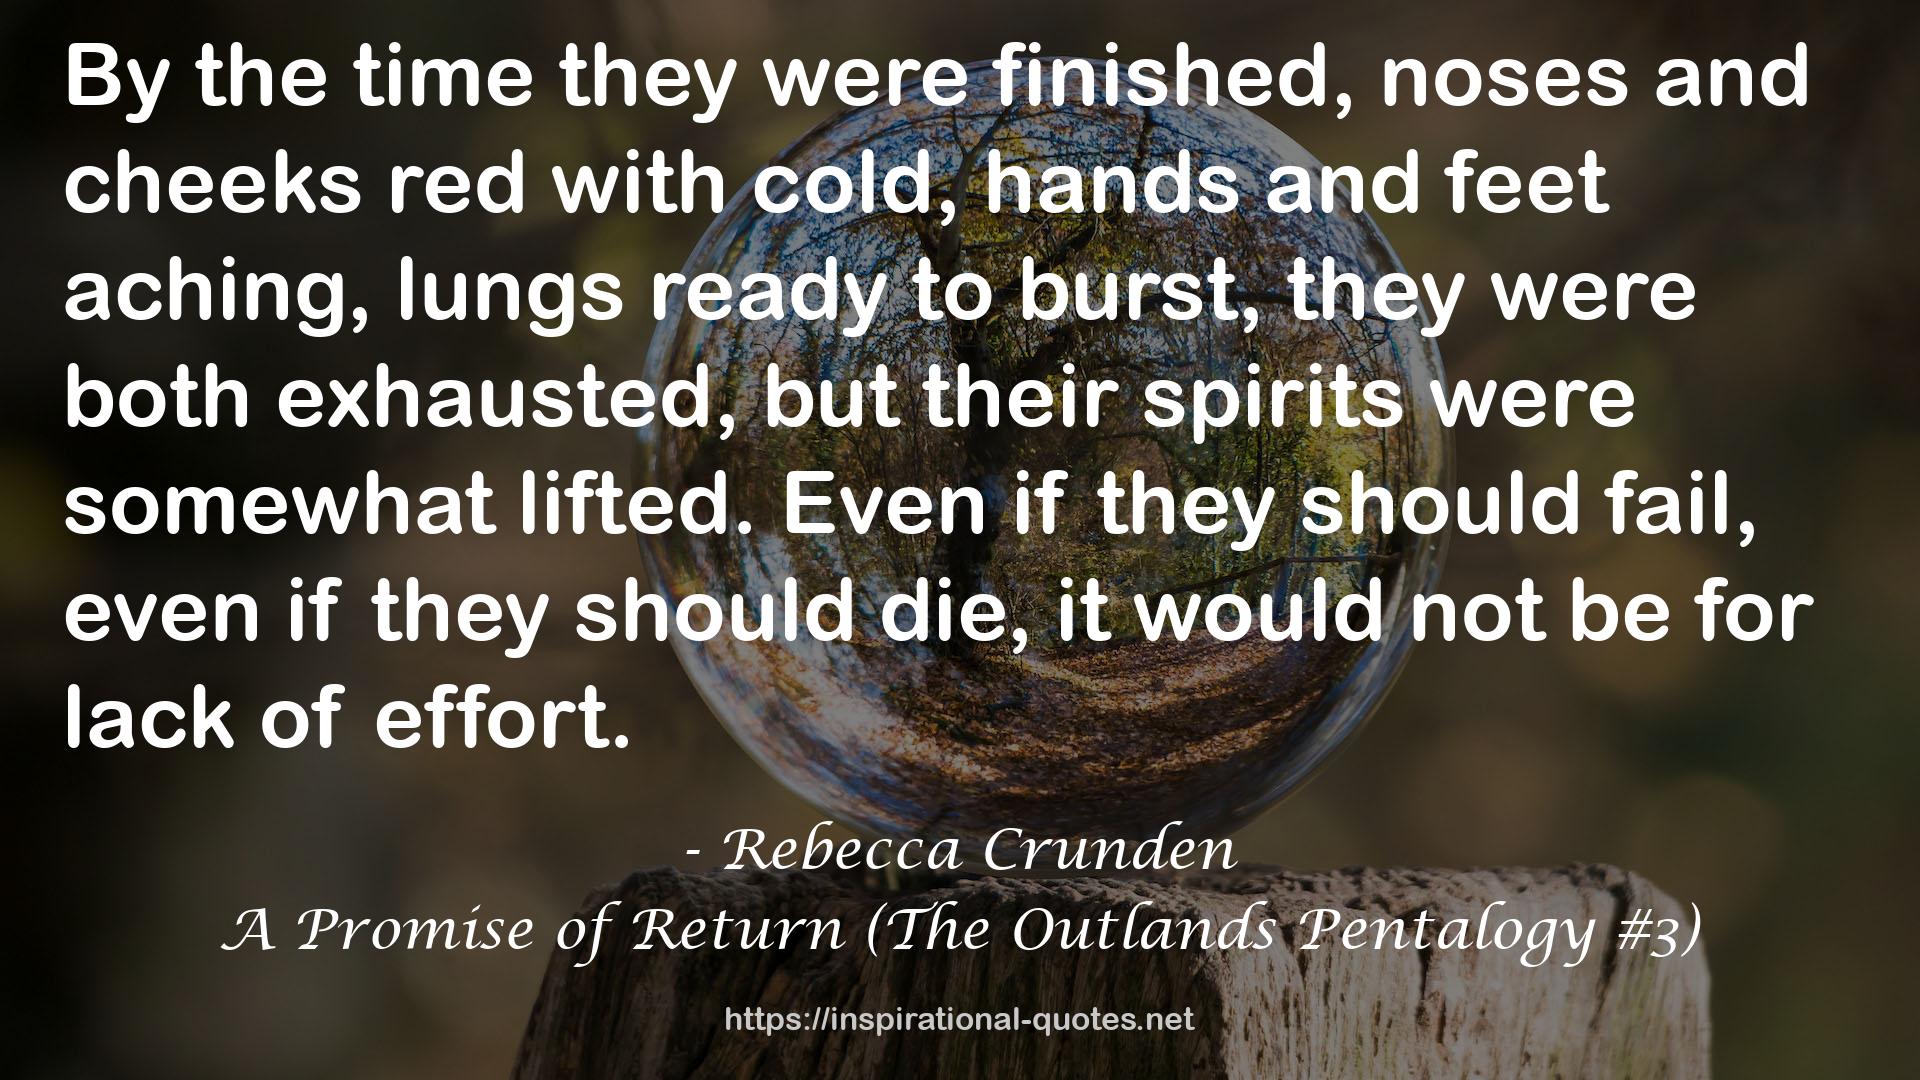 A Promise of Return (The Outlands Pentalogy #3) QUOTES